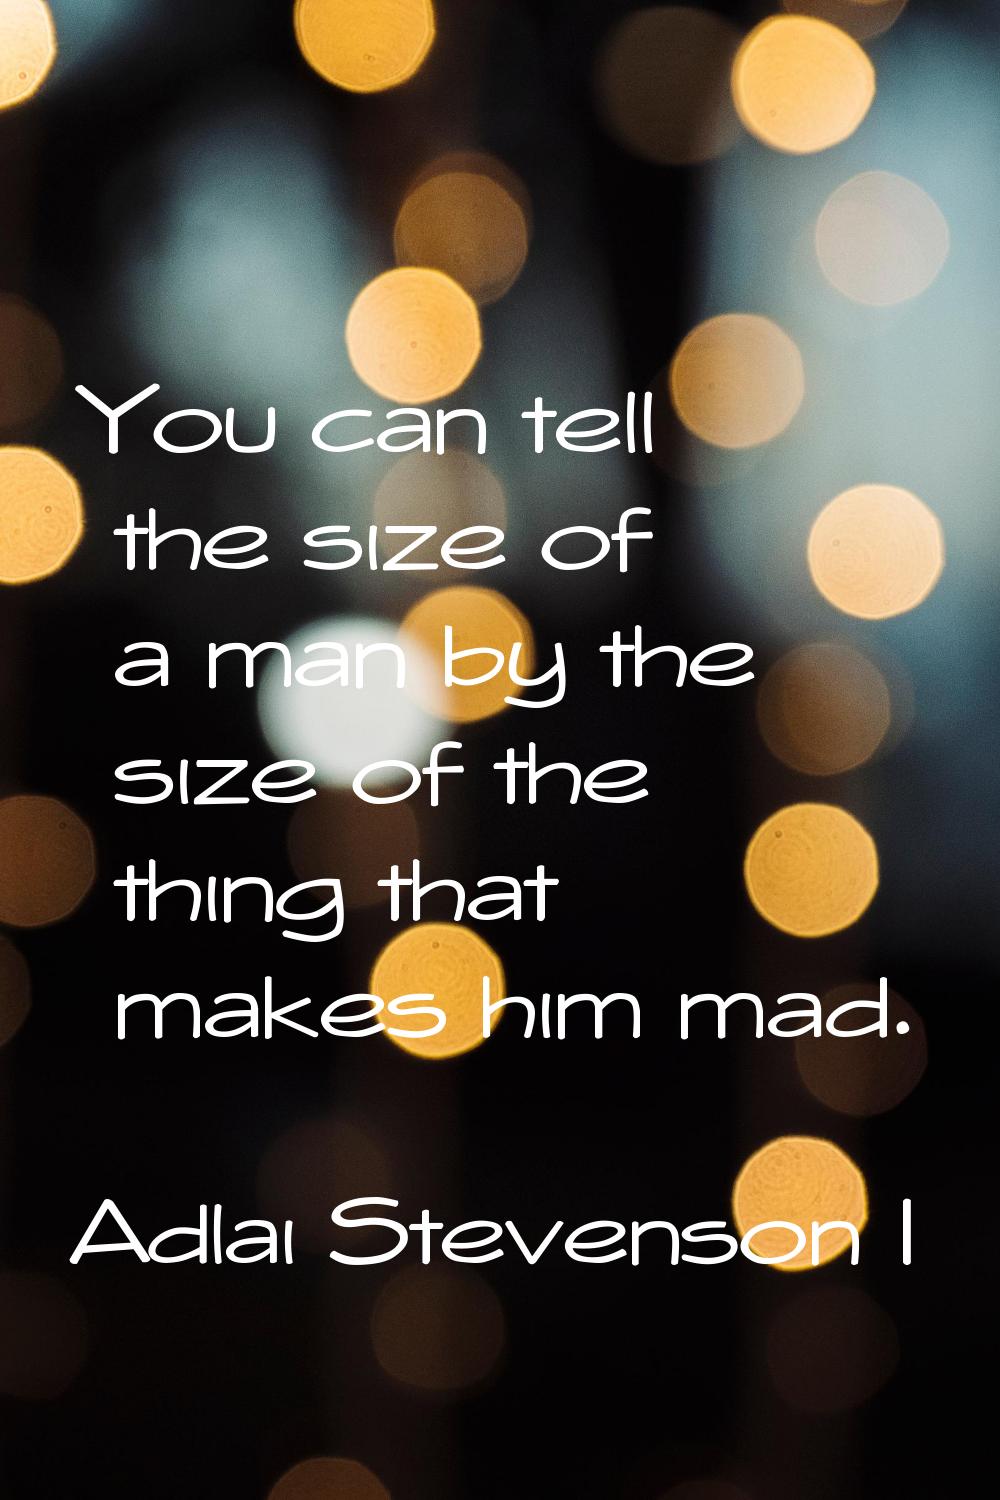 You can tell the size of a man by the size of the thing that makes him mad.